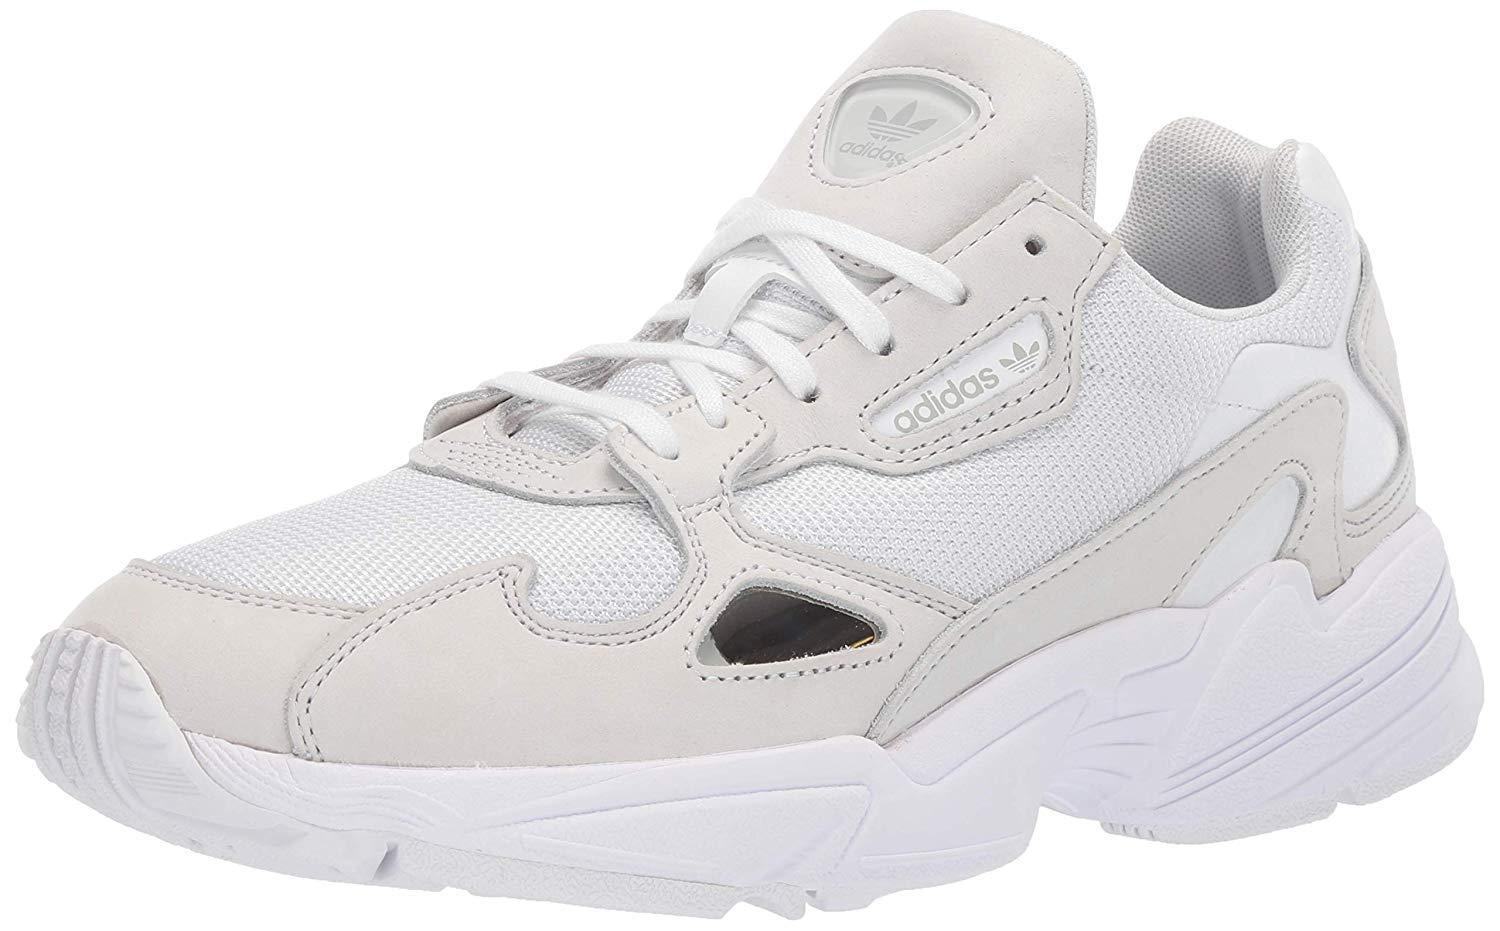 adidas Originals Suede Falcon in White/White/Crystal White (White) - Save  58% - Lyst